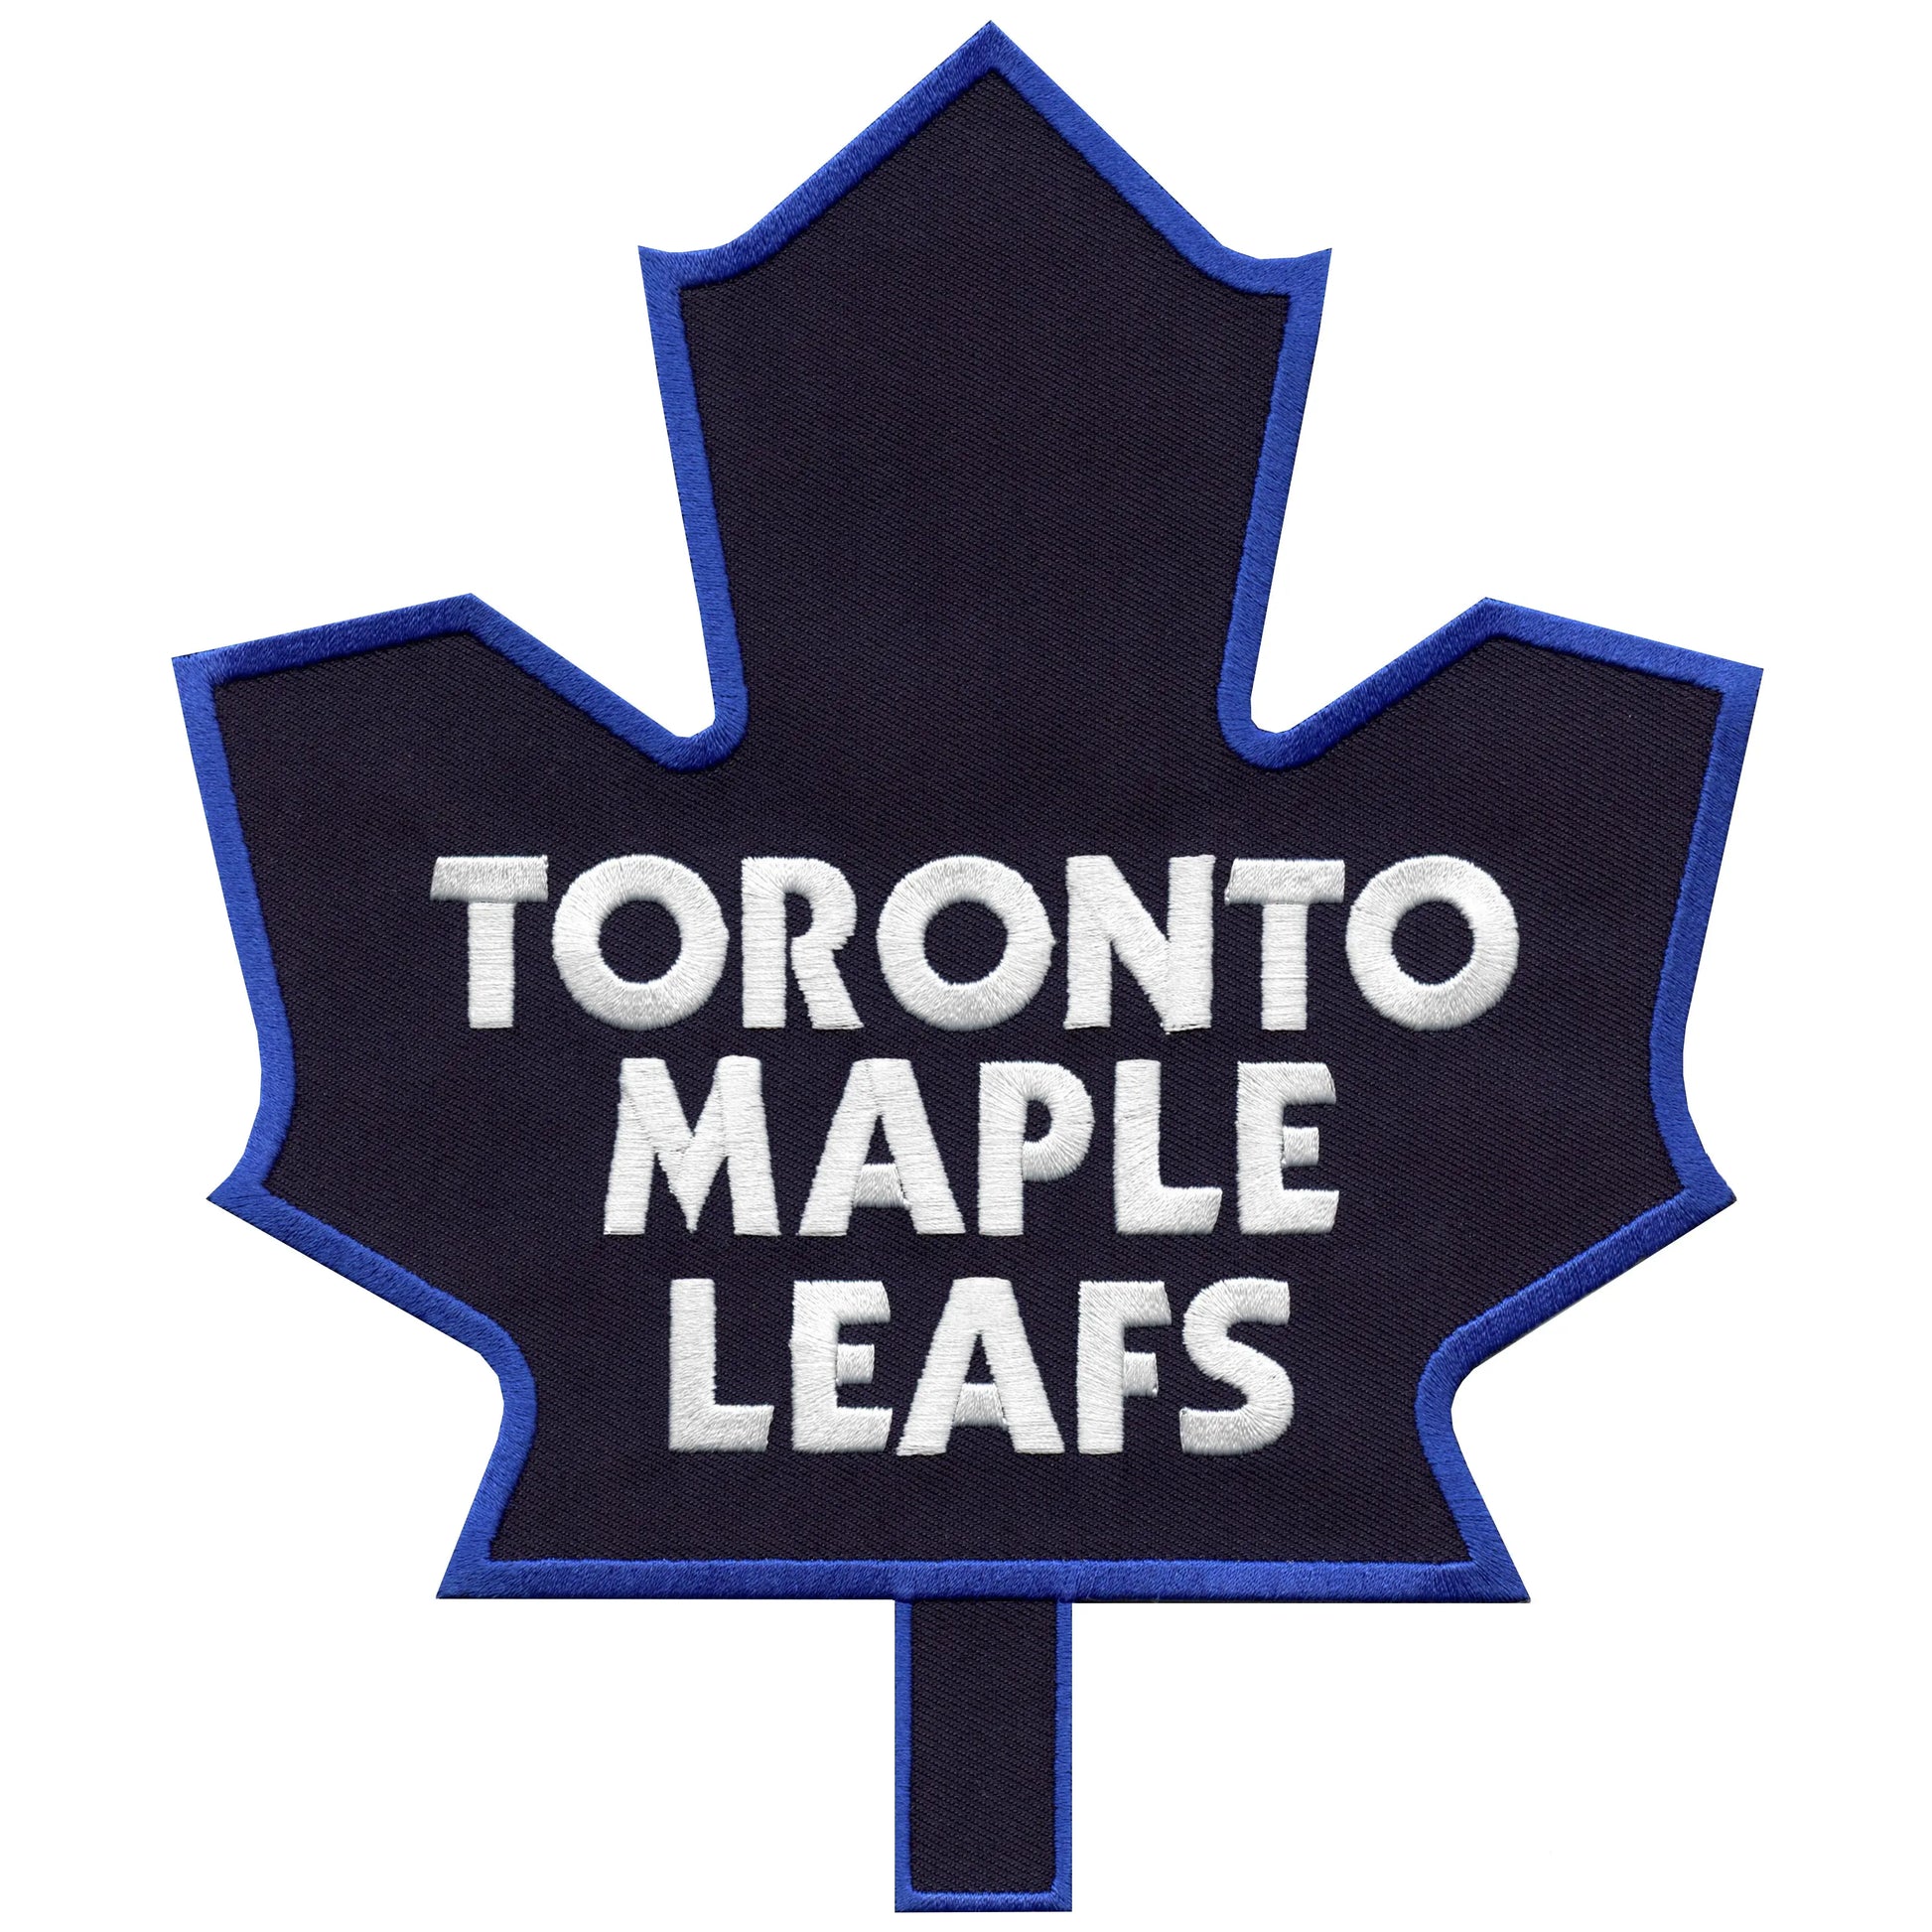 Toronto Maple Leafs Primary Team Logo Patch Large Blue Border